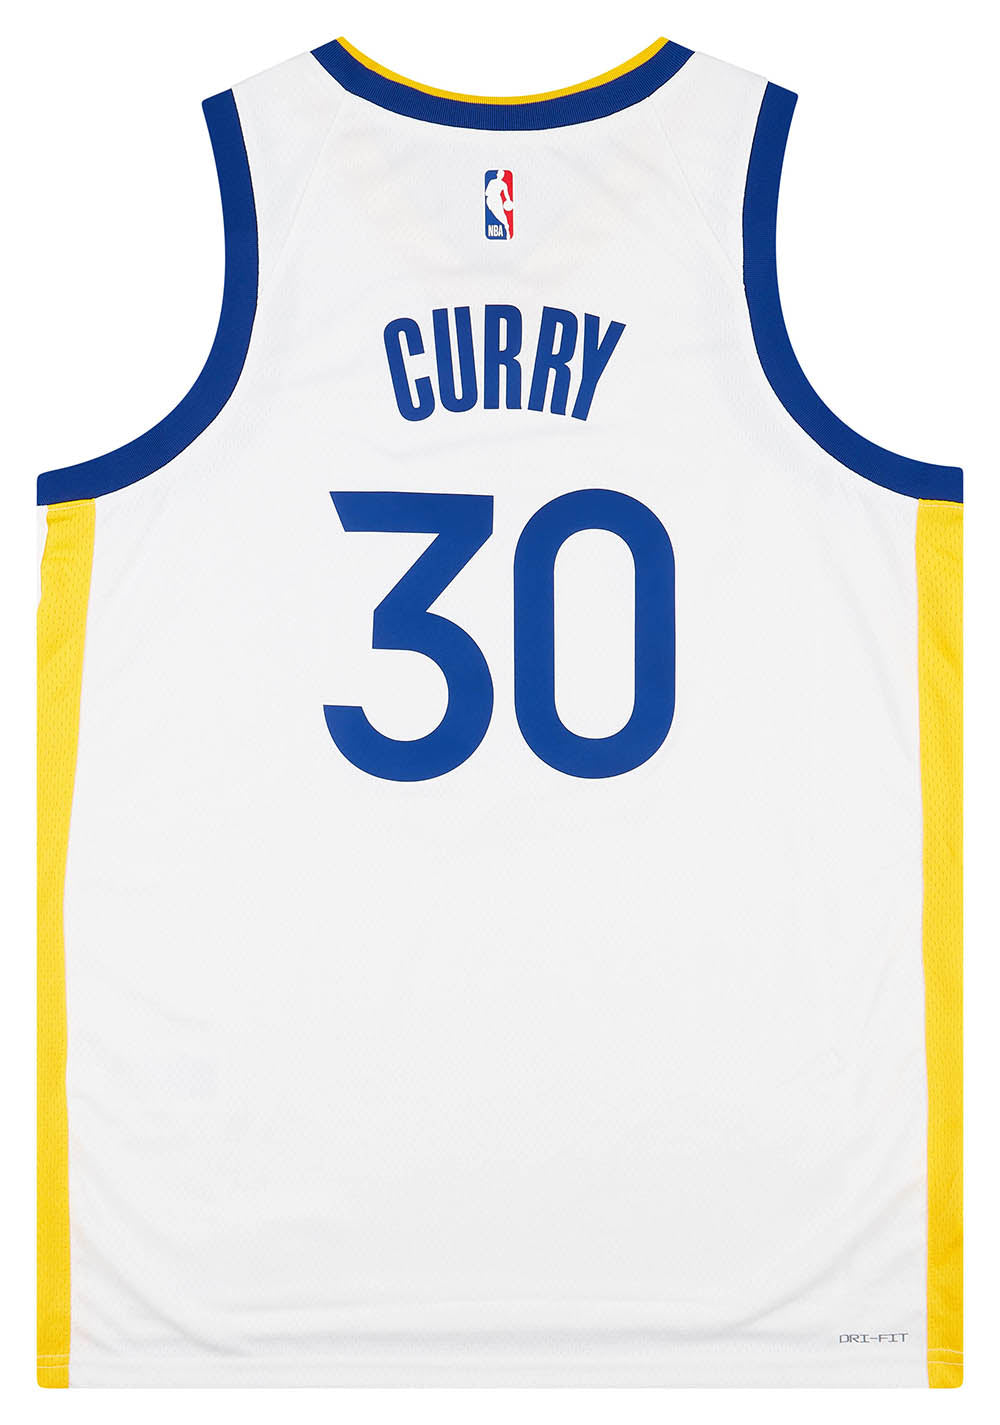 2017-23 GOLDEN STATE WARRIORS CURRY #30 NIKE SWINGMAN JERSEY (HOME) M - W/TAGS